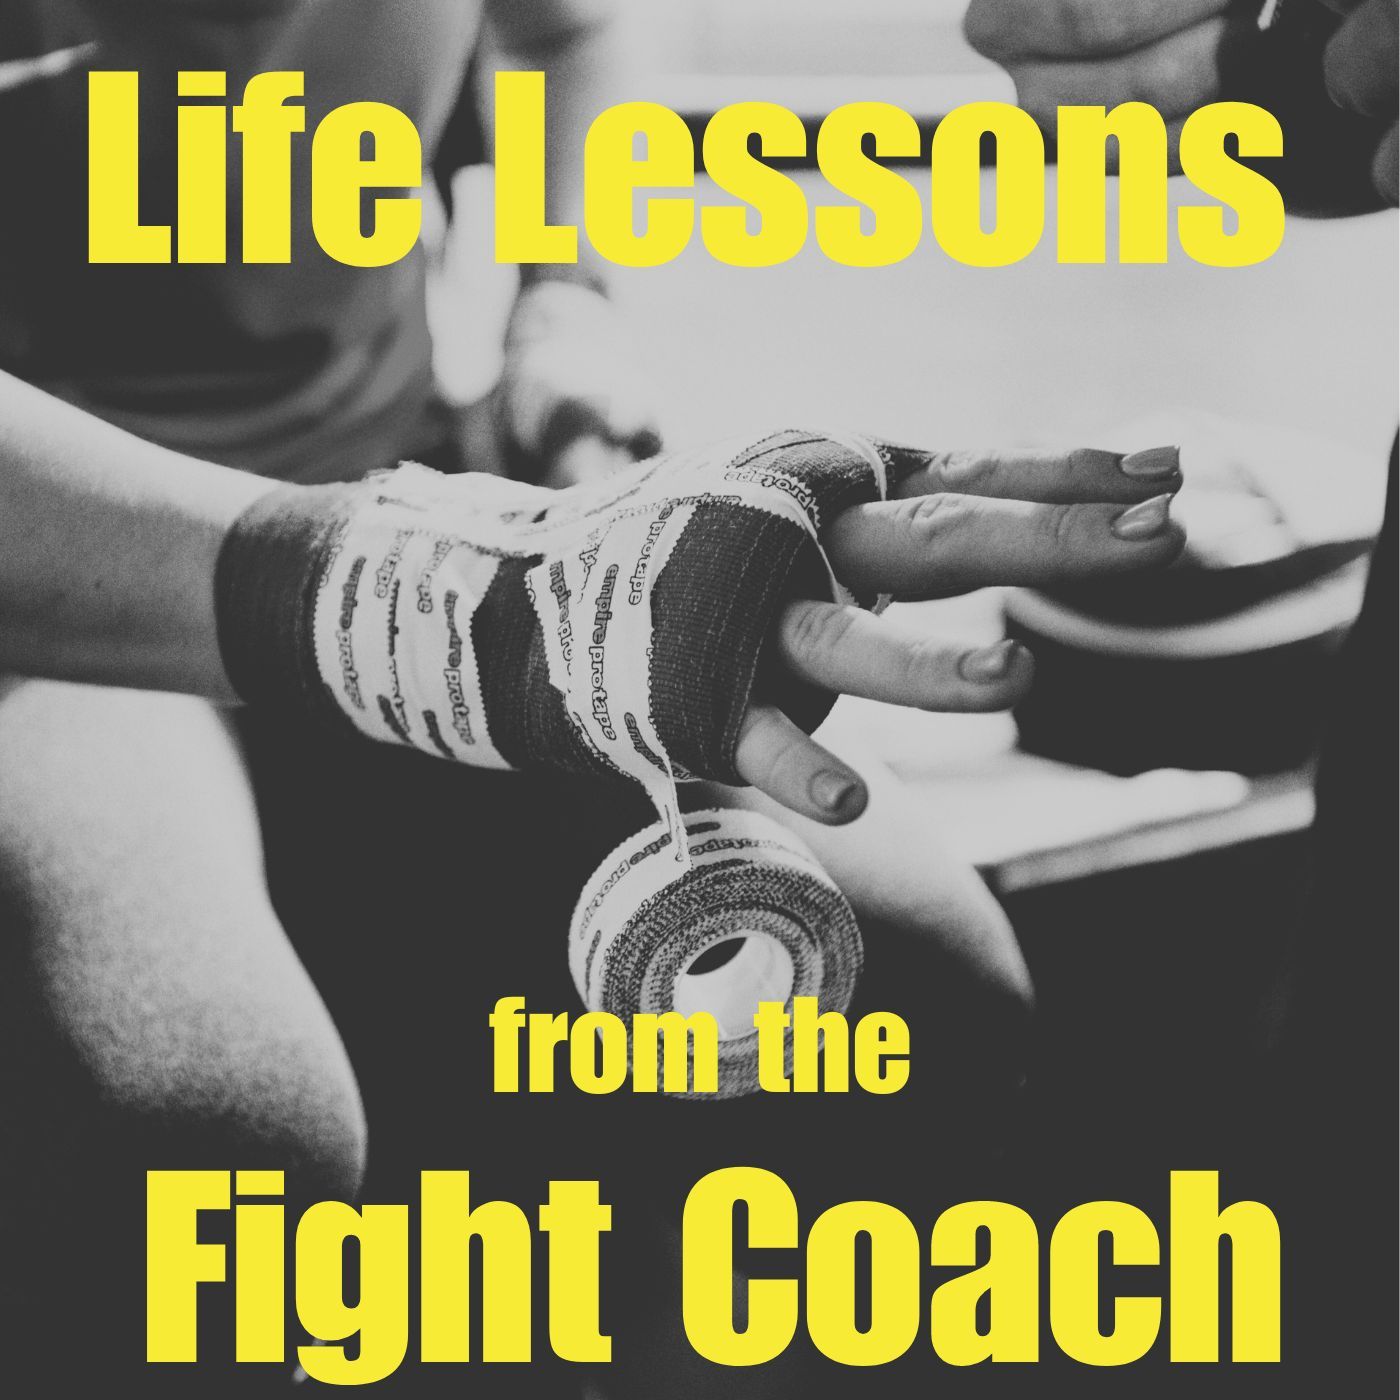 Life lessons from the fight coach